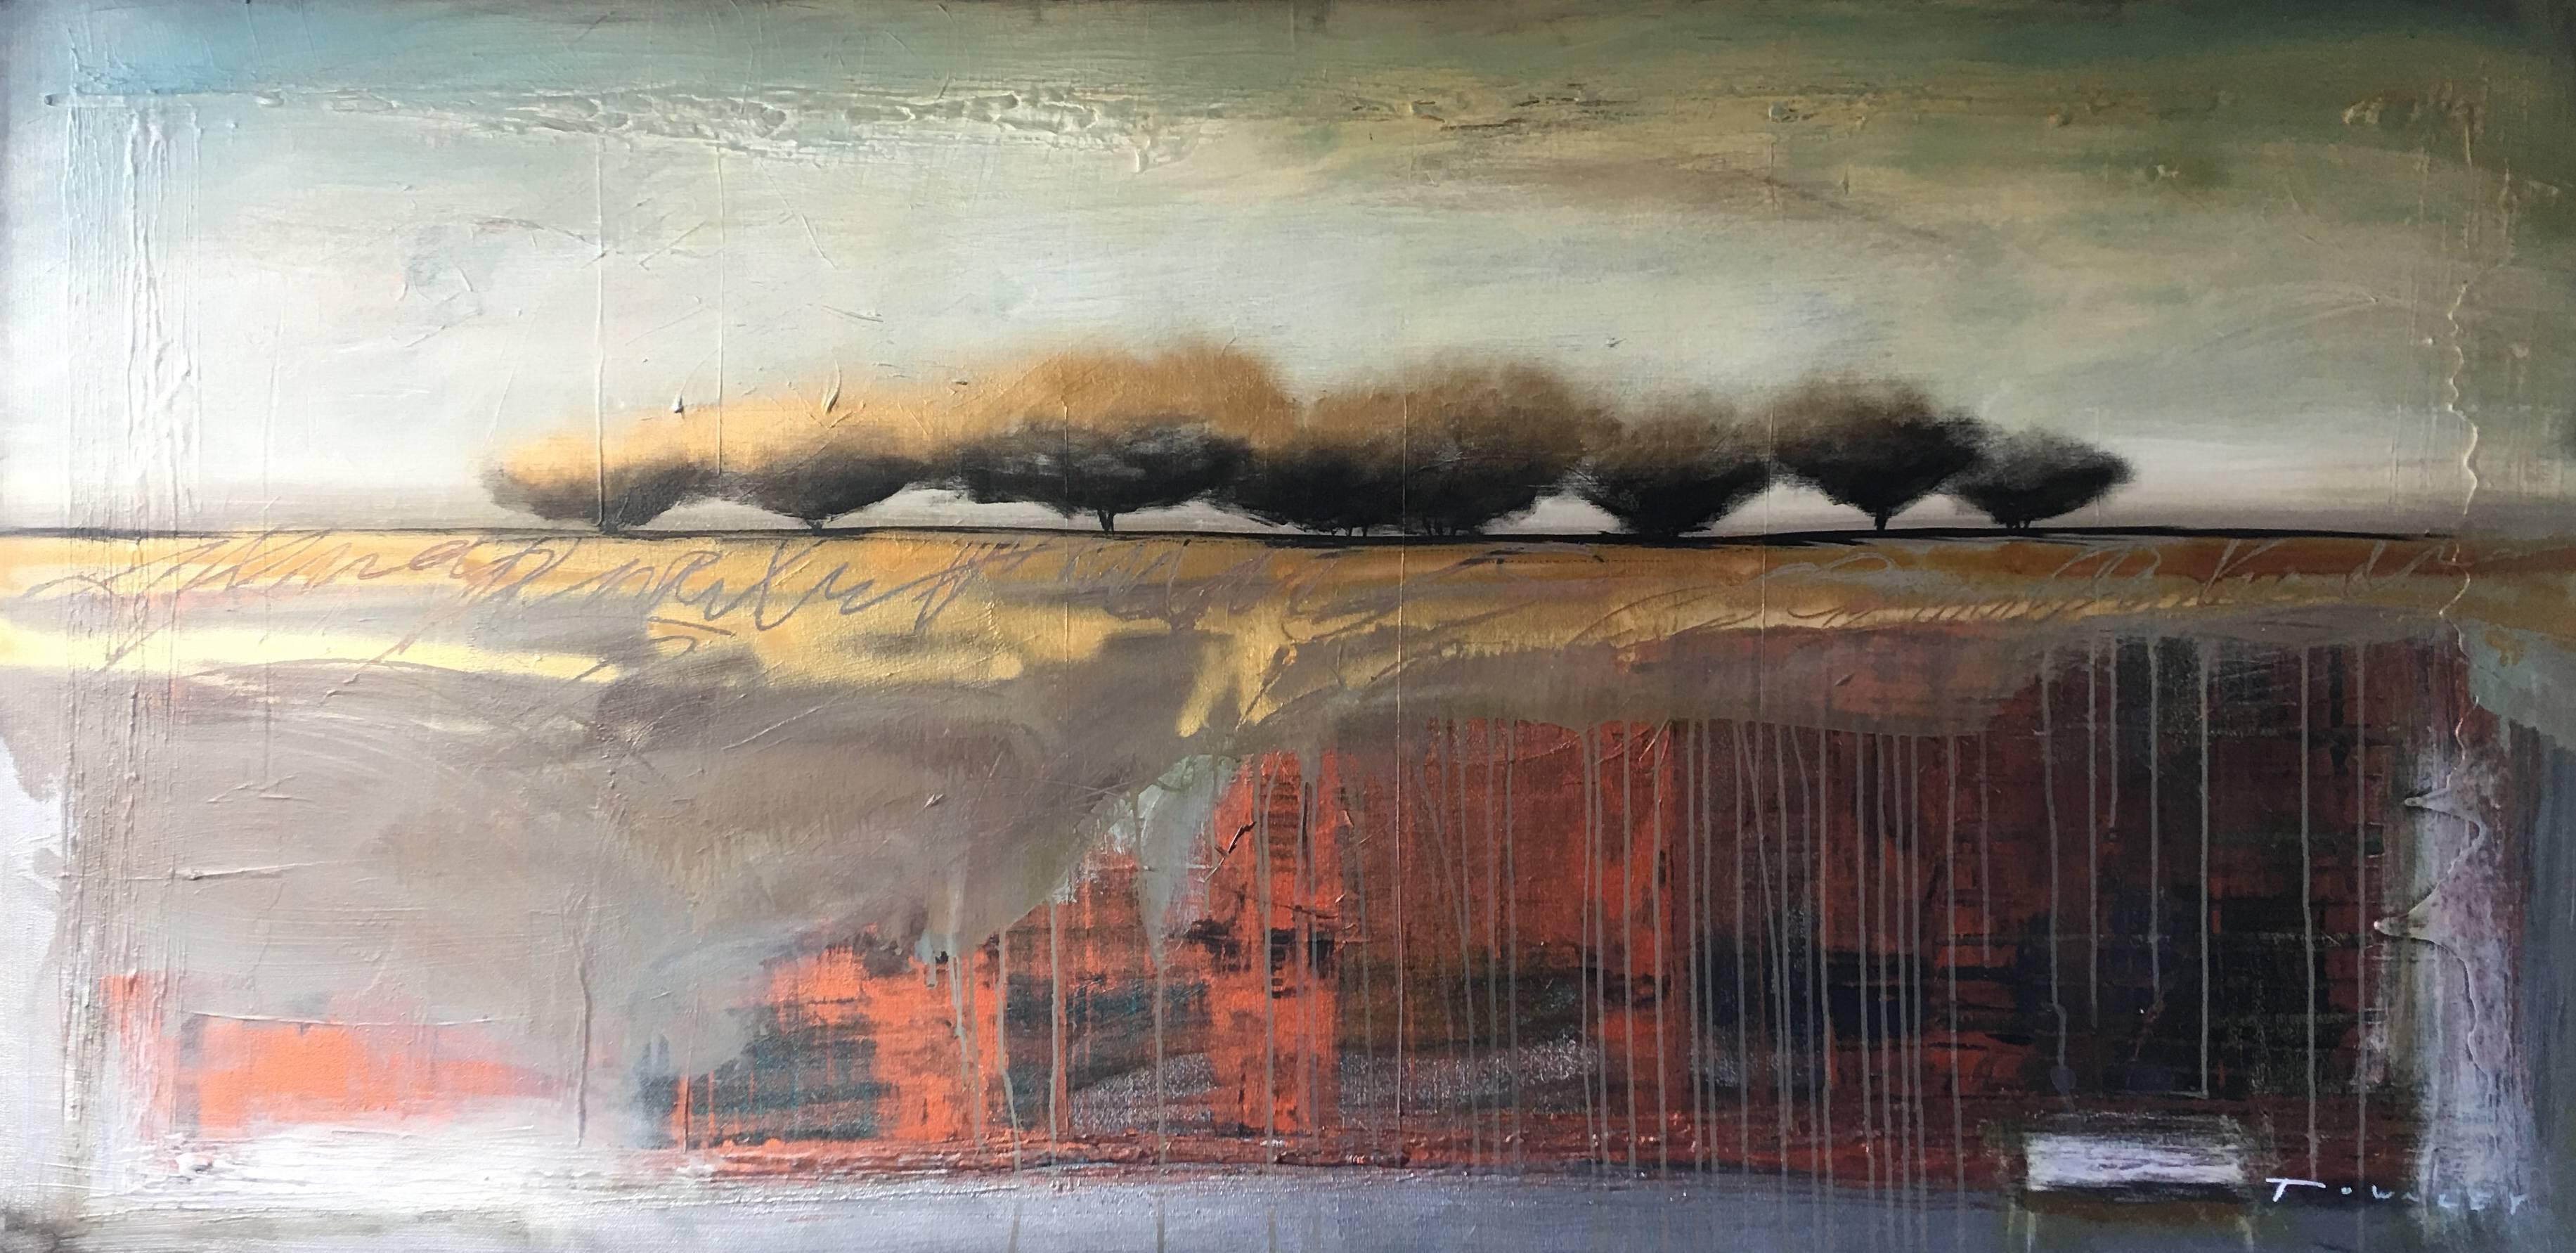 Contemporary landscape painting by artist, Shane Townley. High quality oil and texture on canvas. Great mid century style. Canvas comes fully stretched on 1 1/2in thick canvas, unframed and painted edges. Perfect piece for any collection.

Shane